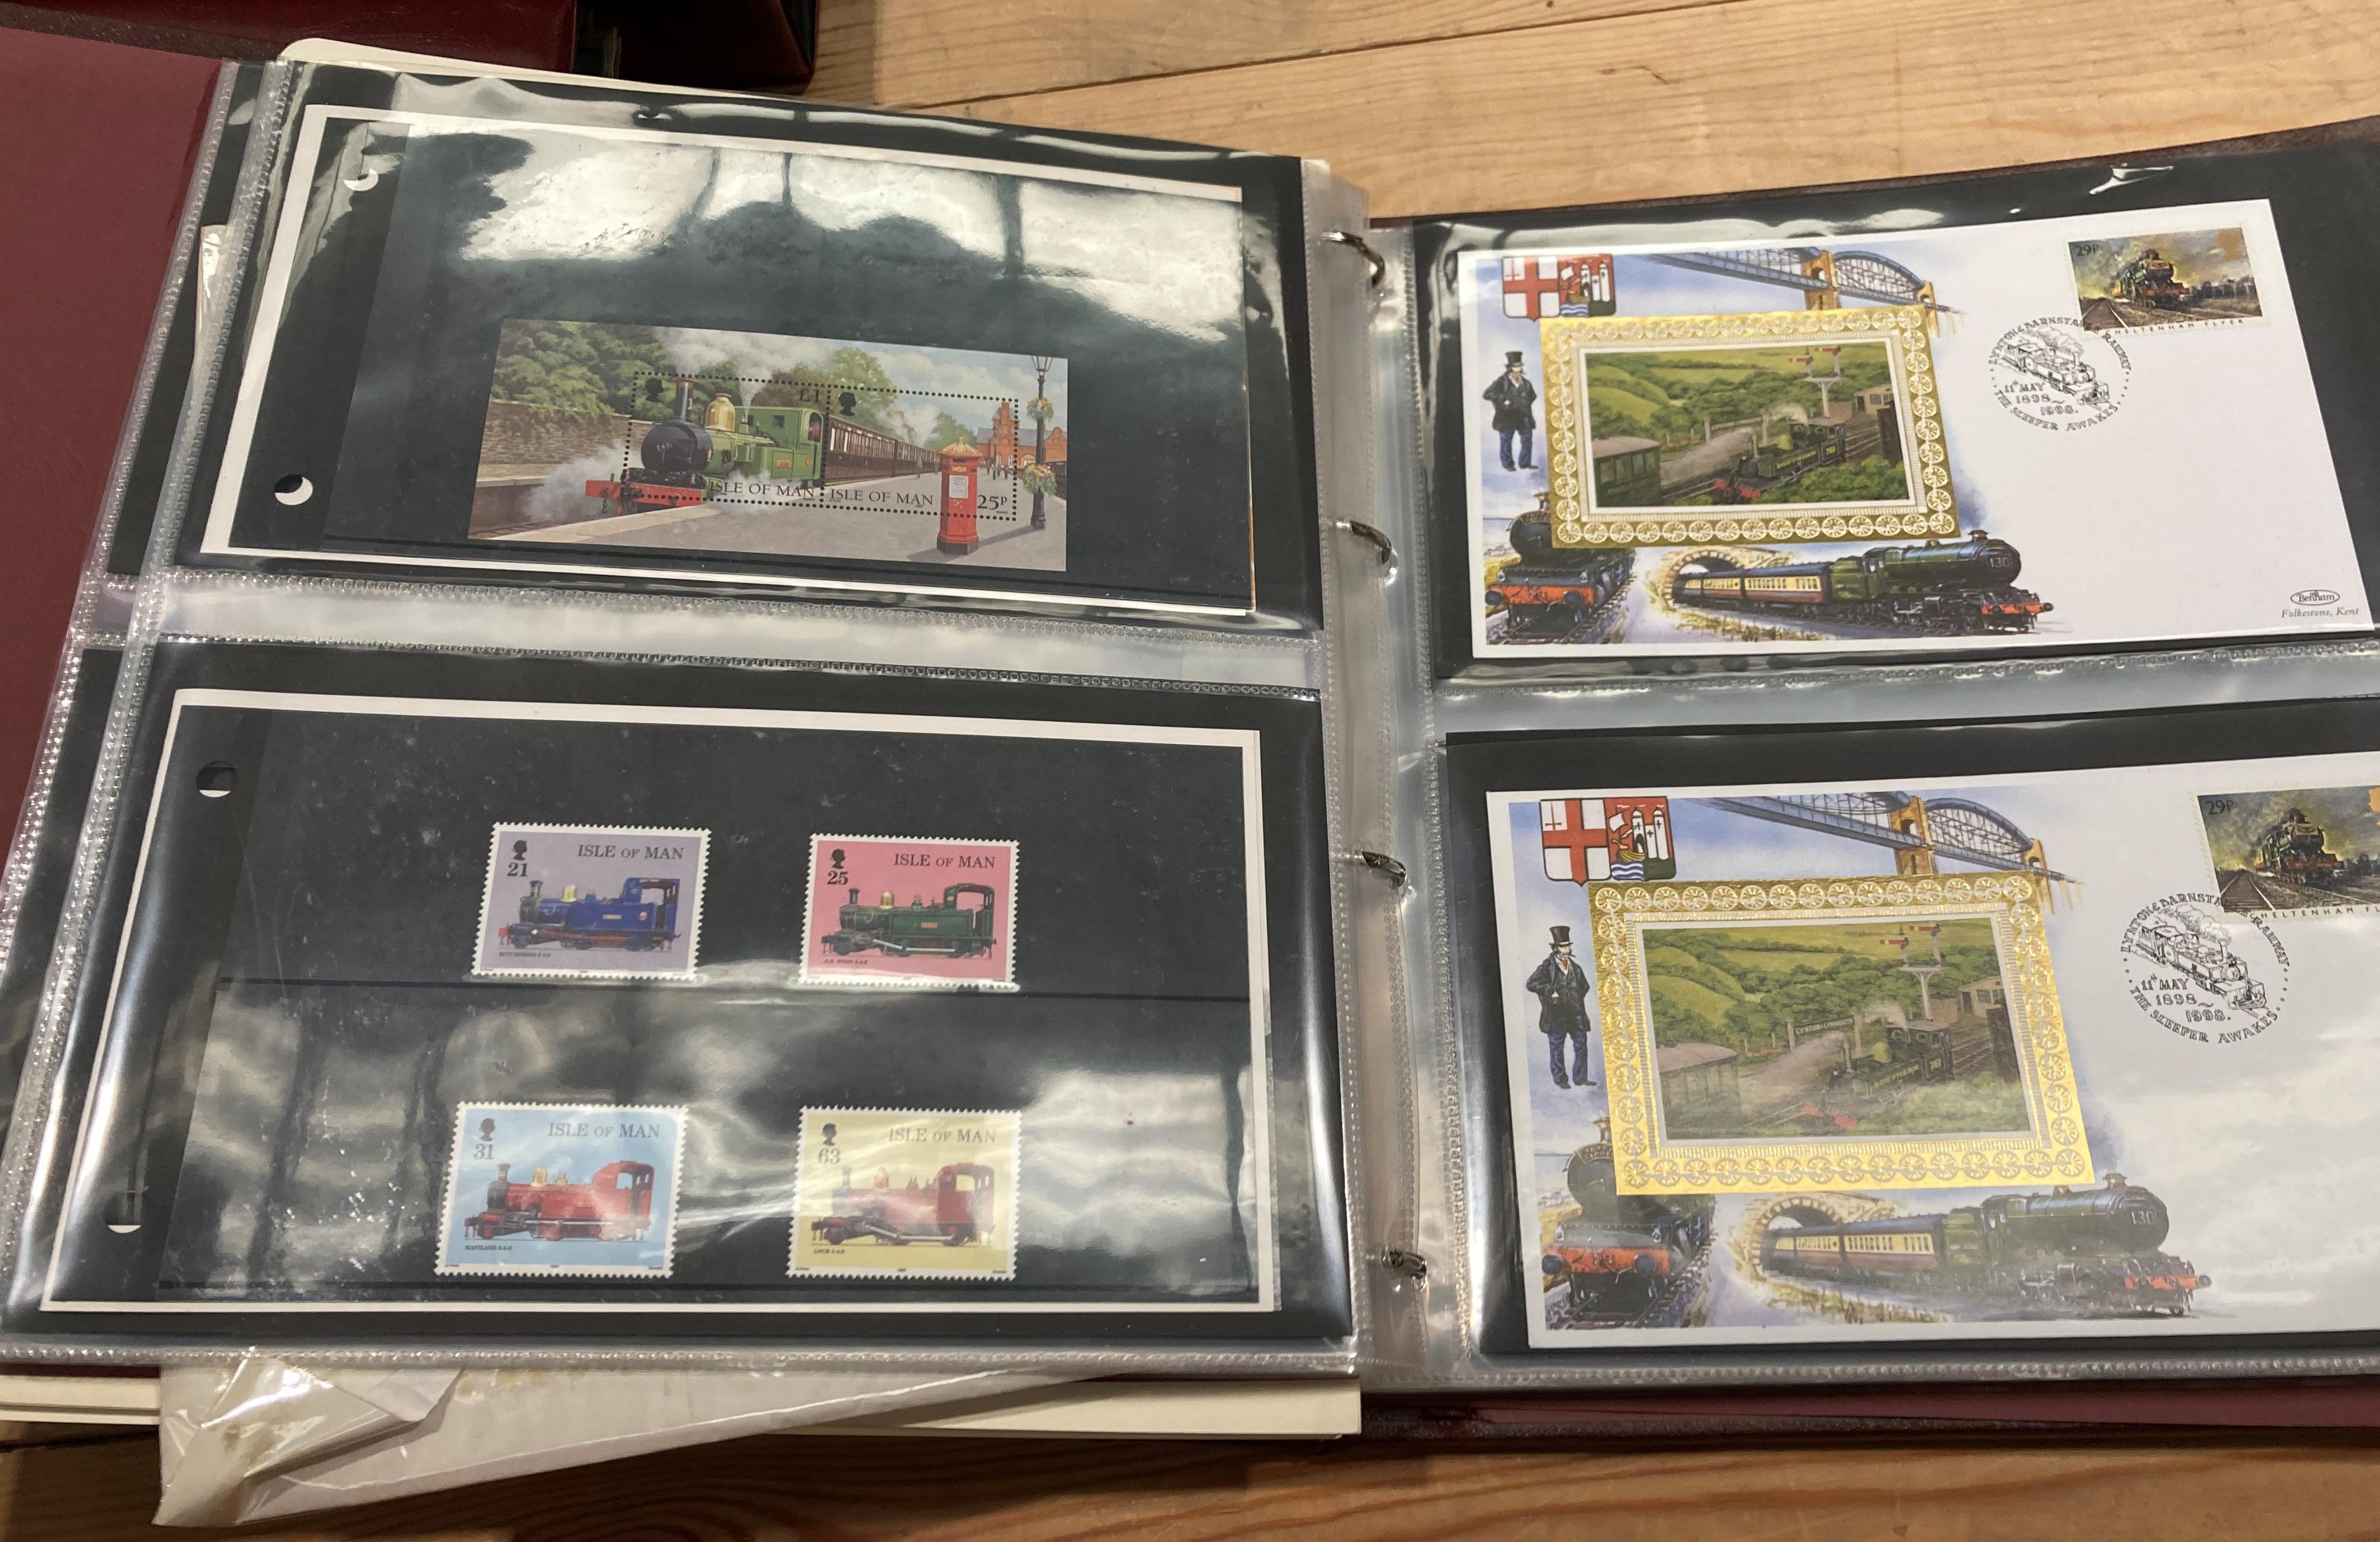 Four albums of Post Office and Royal Mail First Day Covers and one album - the Railway Collection - Image 17 of 17